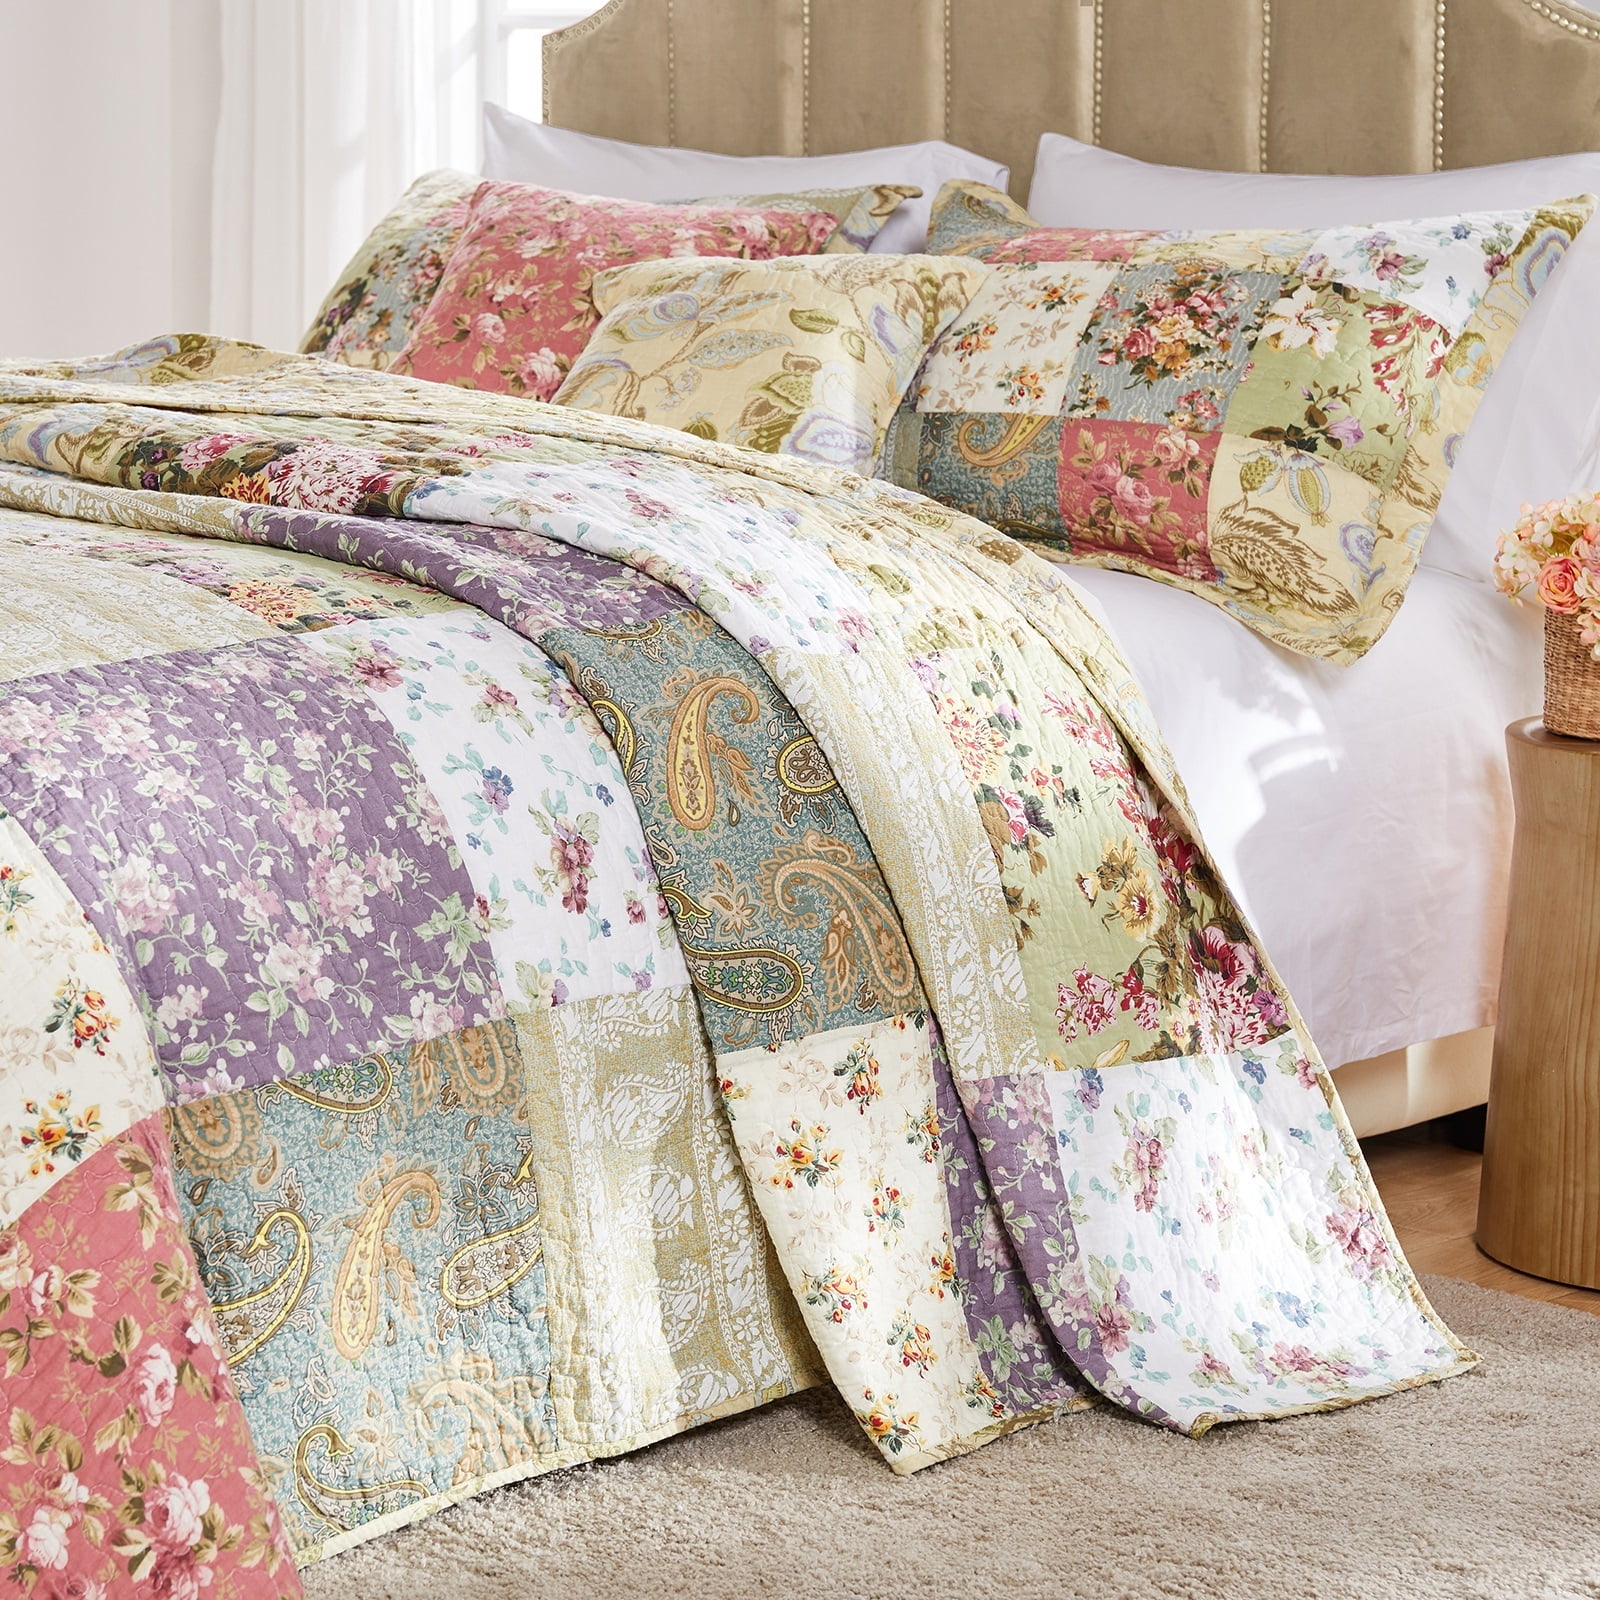 Details about  / Twin 2 Piece Bedding Set Comforter Pillow Case Ruffled Shabby Chic Farmhouse